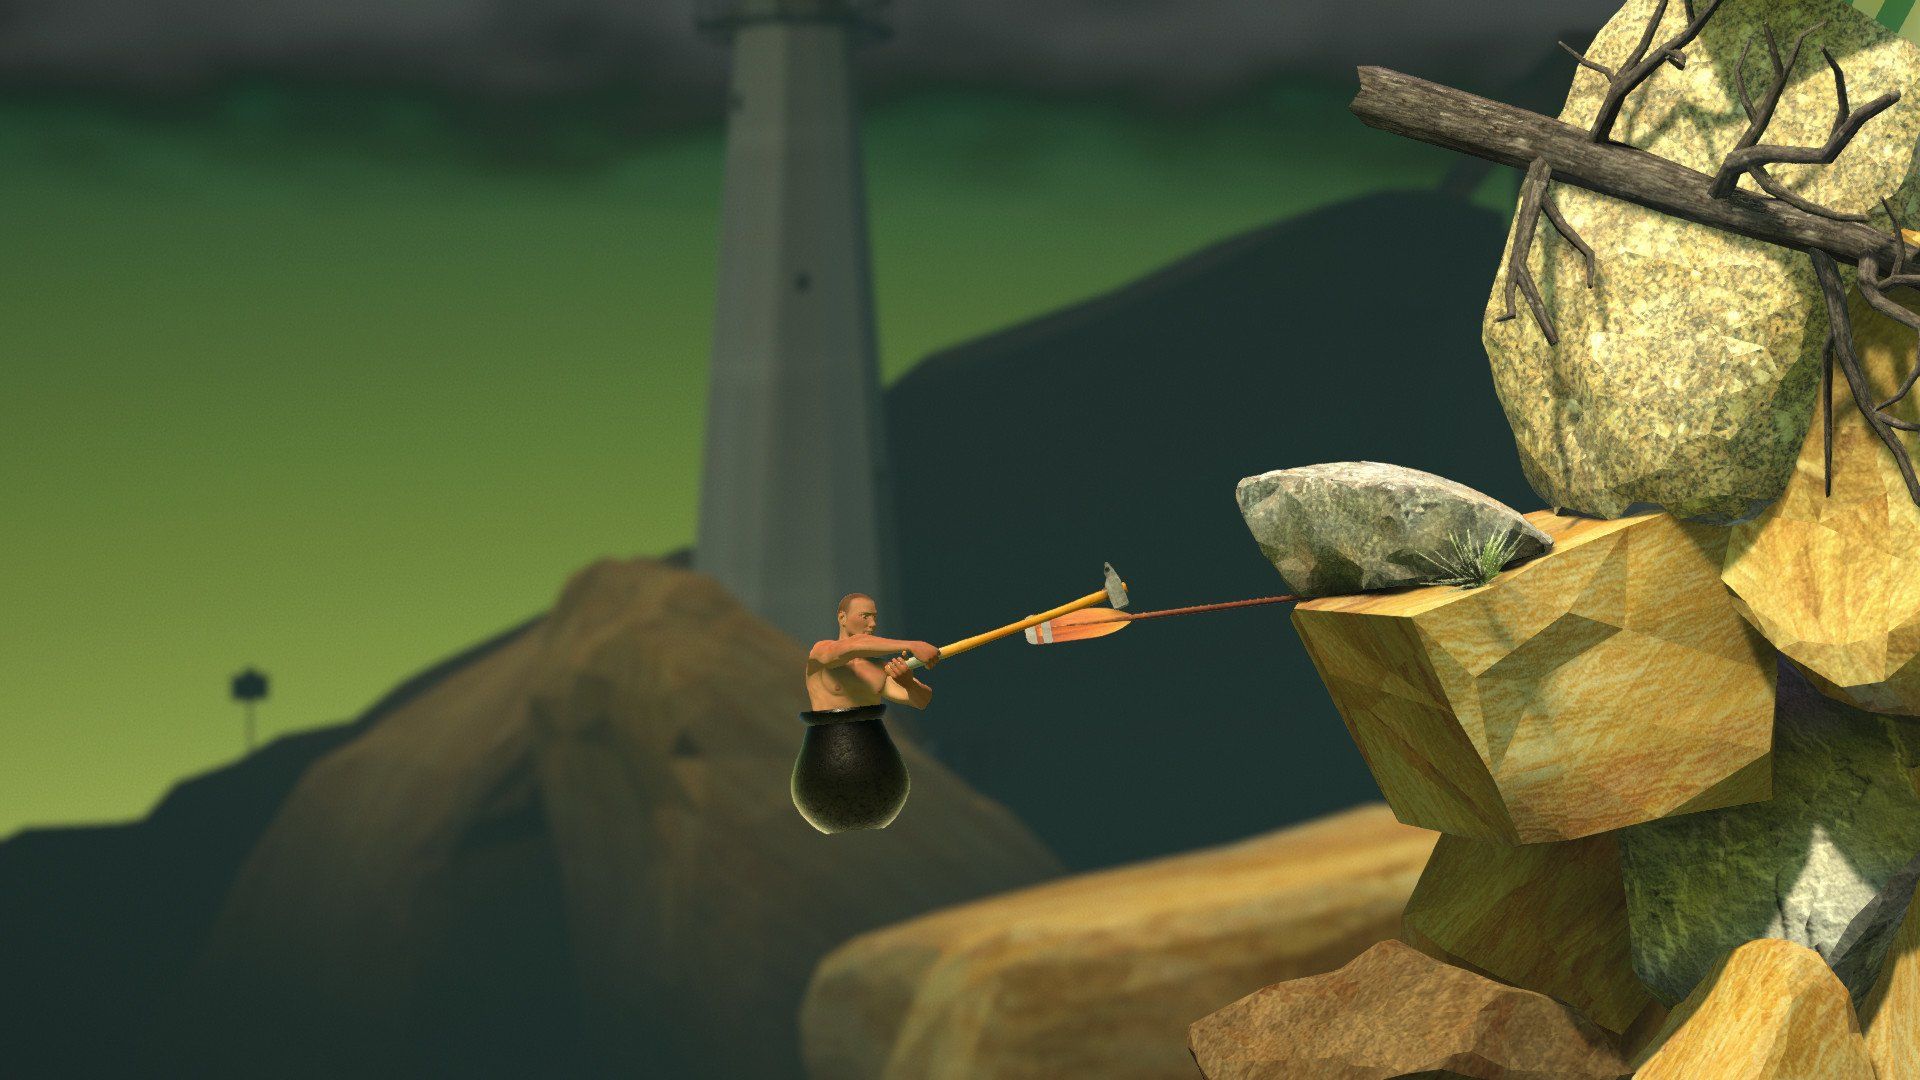 Getting Over It with Bennett Foddy HD Wallpaper and Background Image